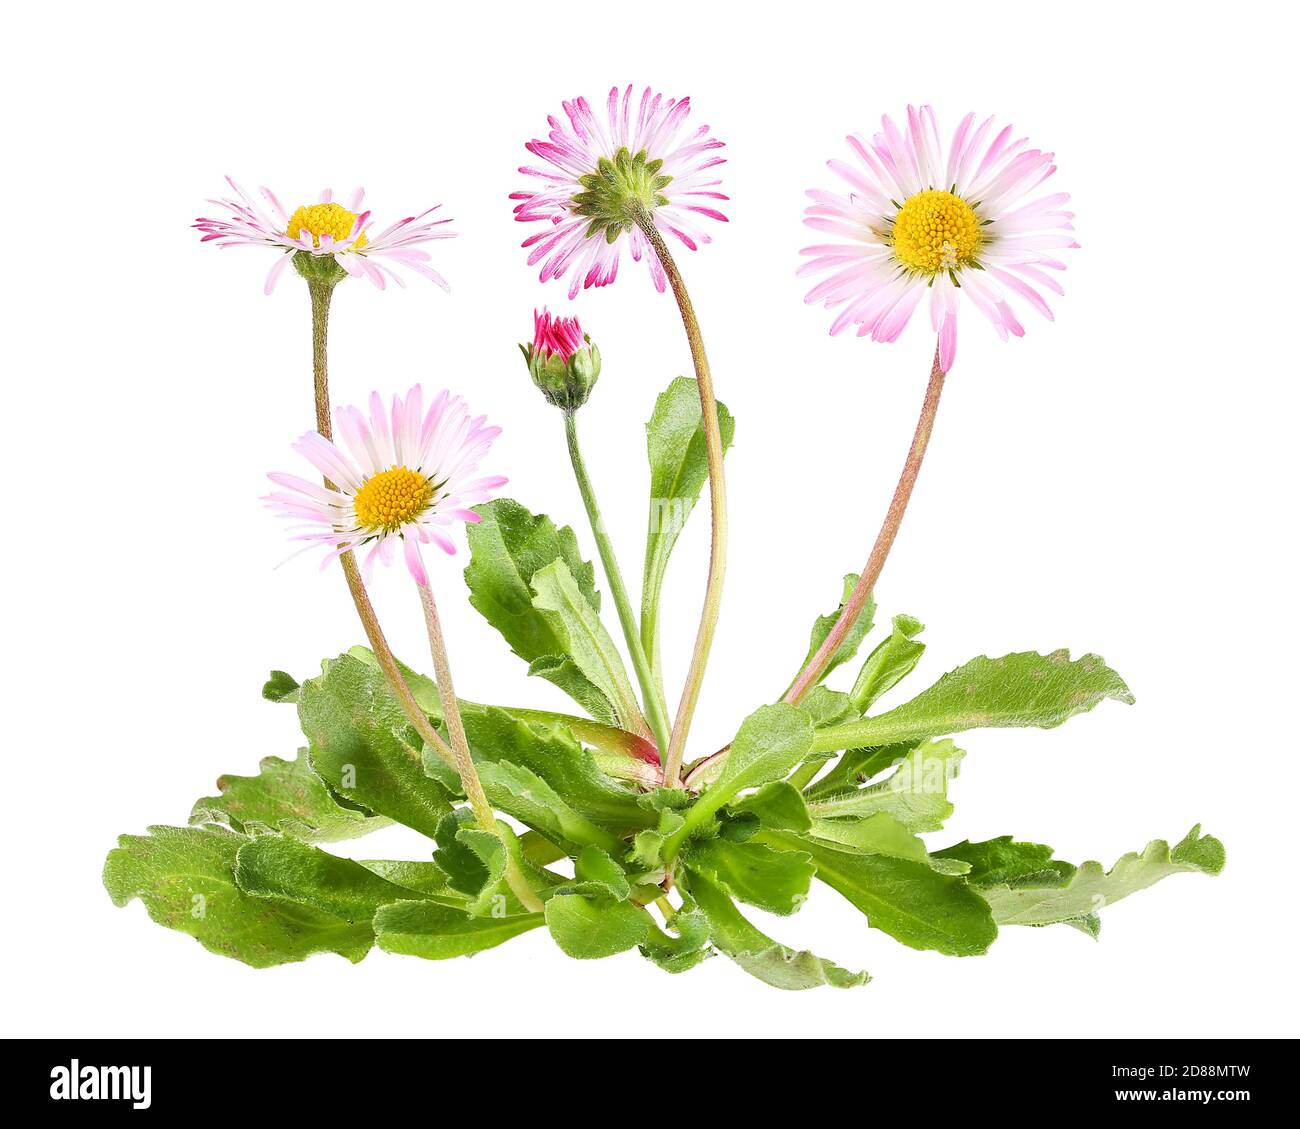 Daisies with leaves, isolated plant Stock Photo